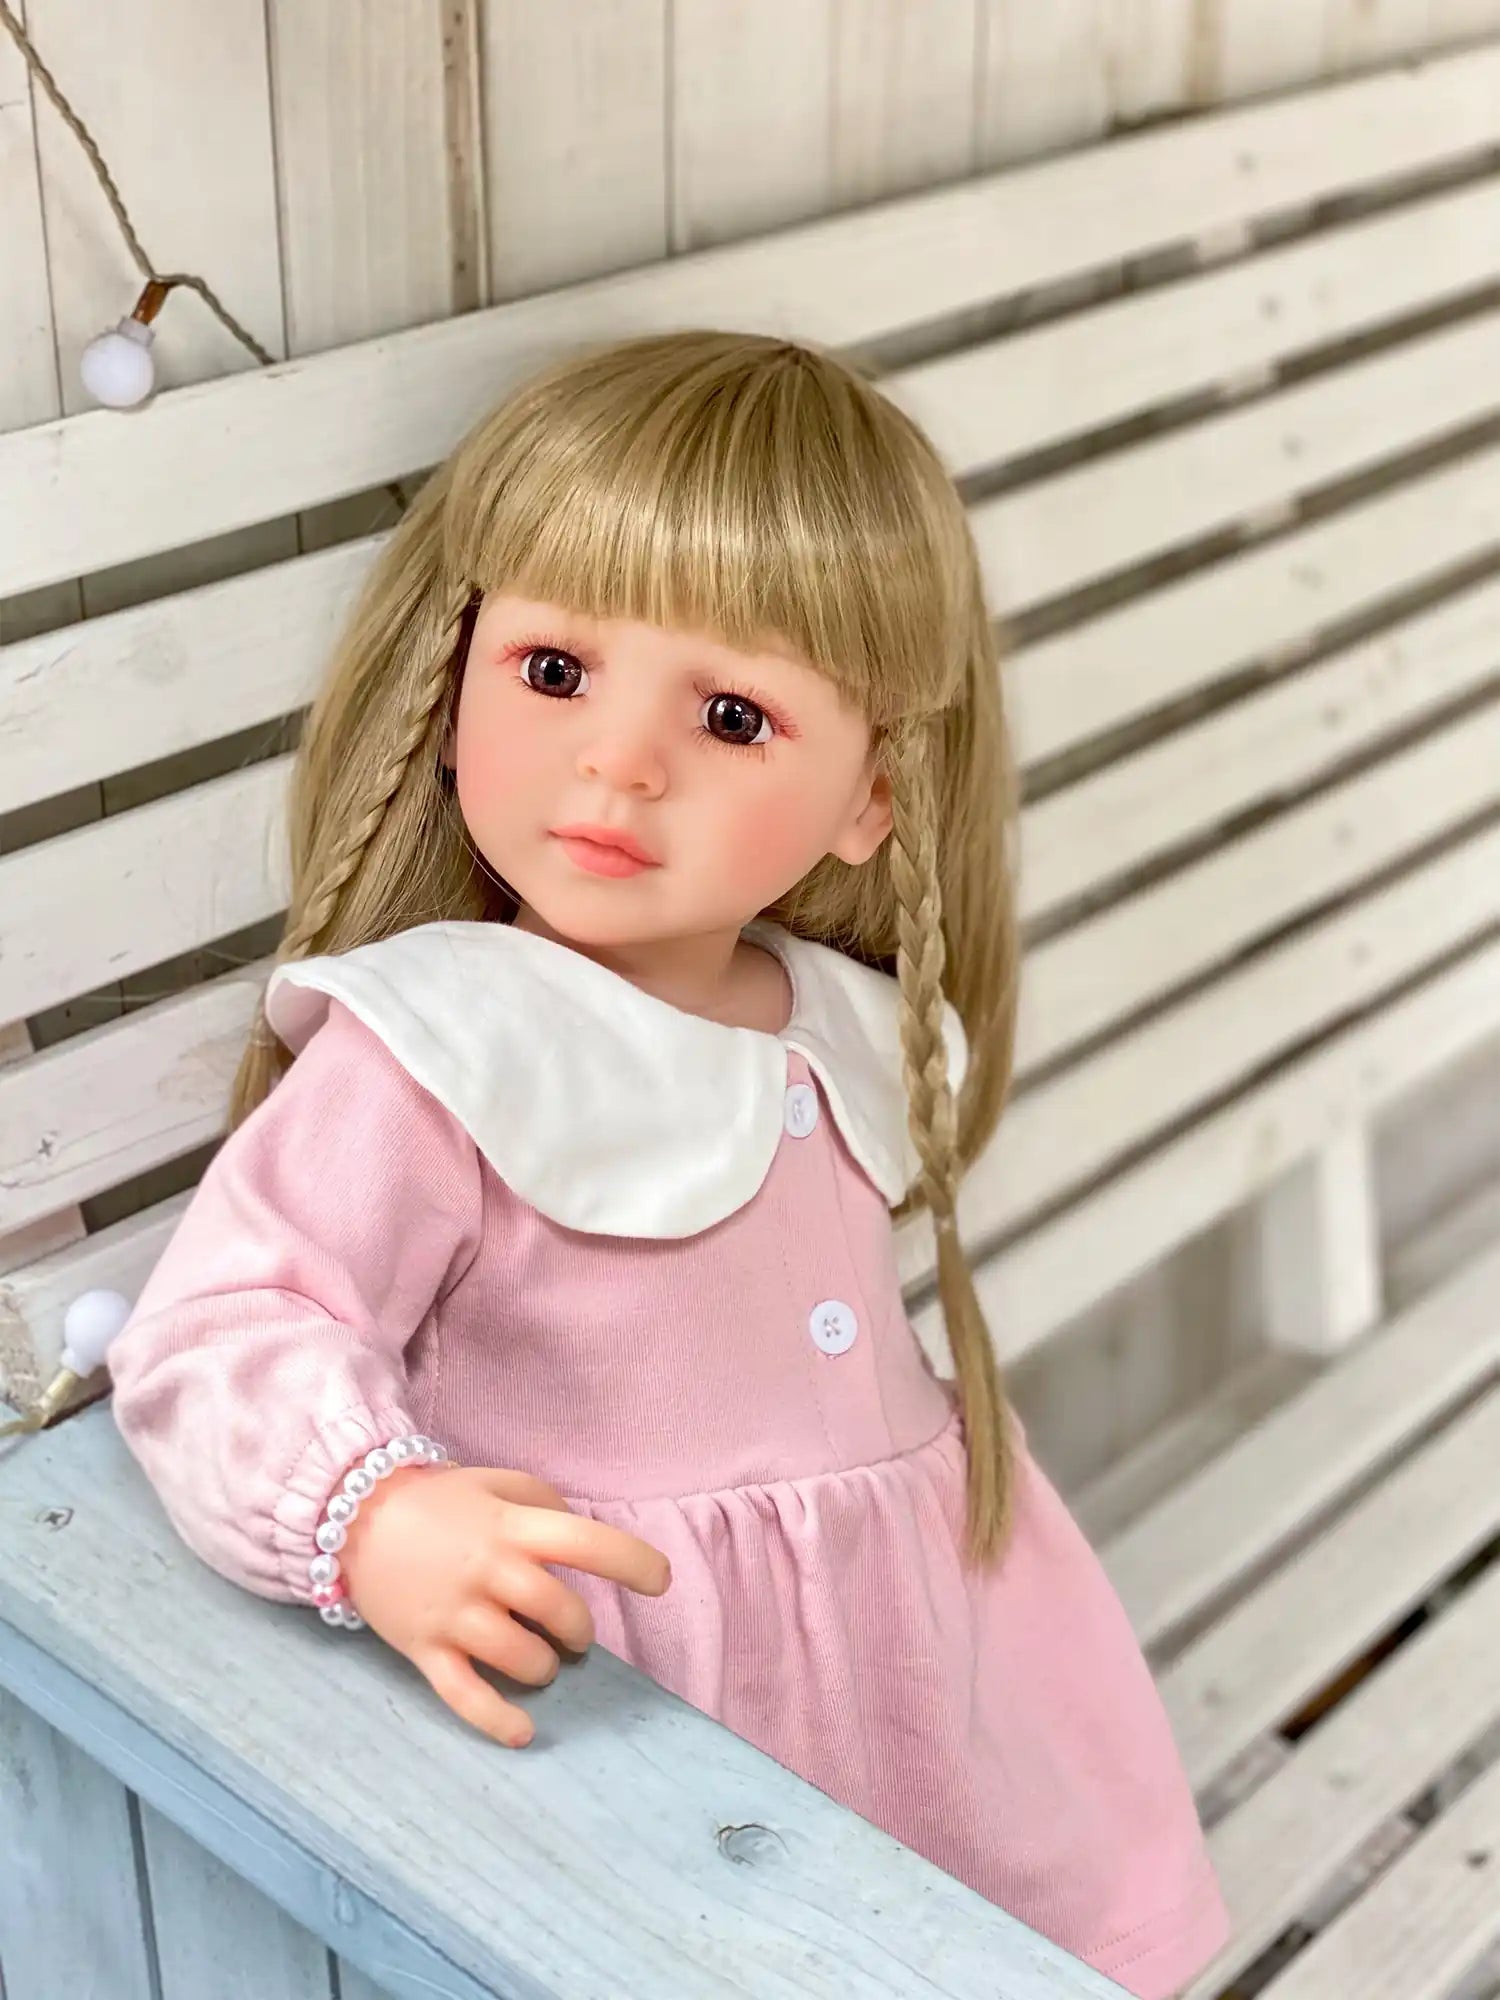 Reborn doll with blonde braids and a pink dress, seated on a rustic bench.